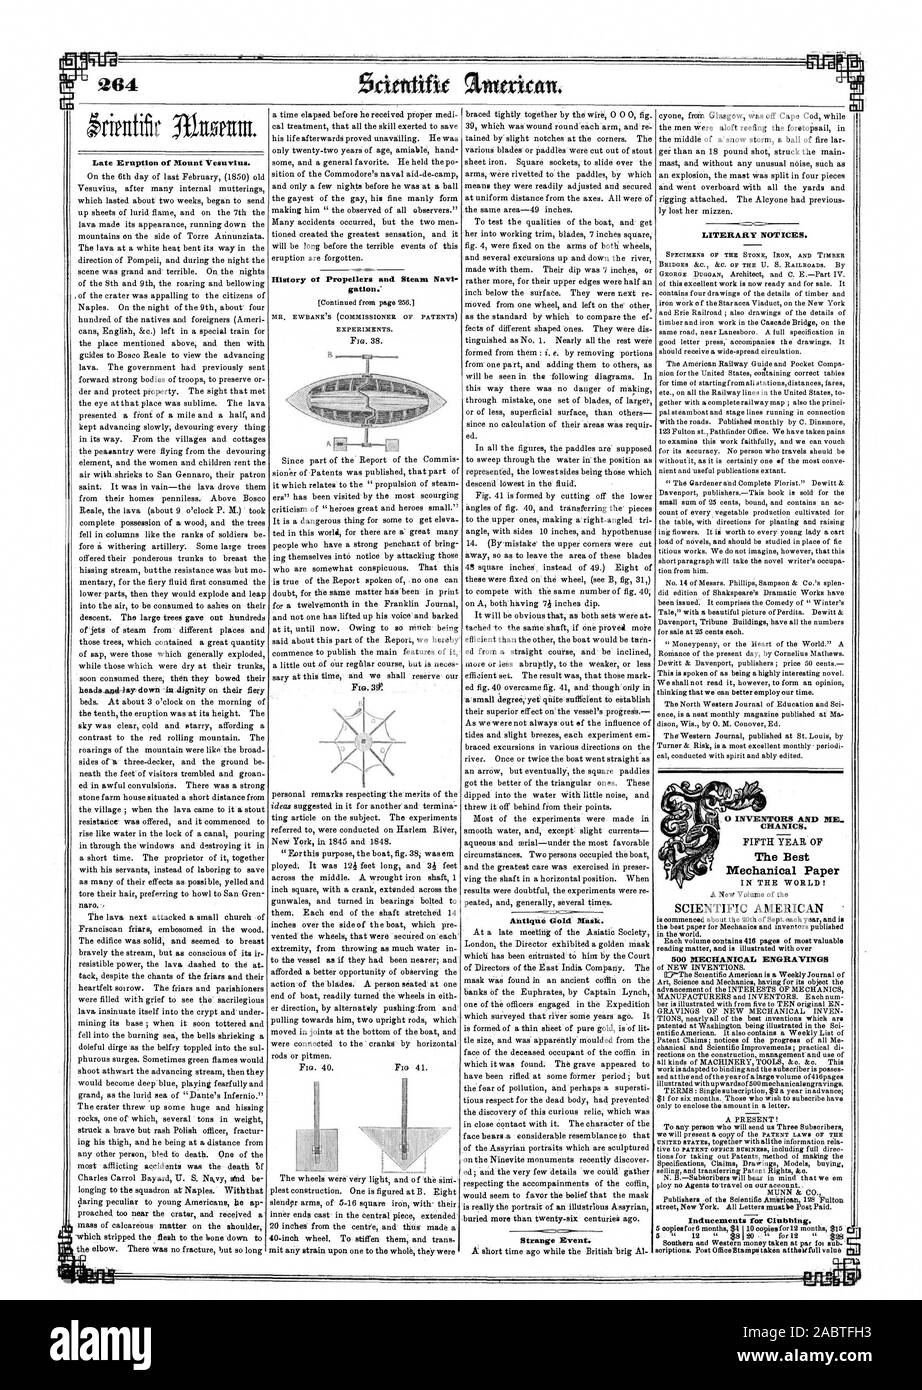 Late Eruption of Mount Vesuvius. gation.' Antique Gold Mask. LITERARY NOTICES. .sr  [1: Strange Event. FIFTH YEAR OF The Best Mechanical Paper IN THE WORLD! A New Volume of the SCIENTIFIC AMERICAN Inducements for Clubbing. Southern and Western money taken at par Jo' sub.' soriptions. Post Office Stainpli taken attheit full value, 1850-05-04 Stock Photo